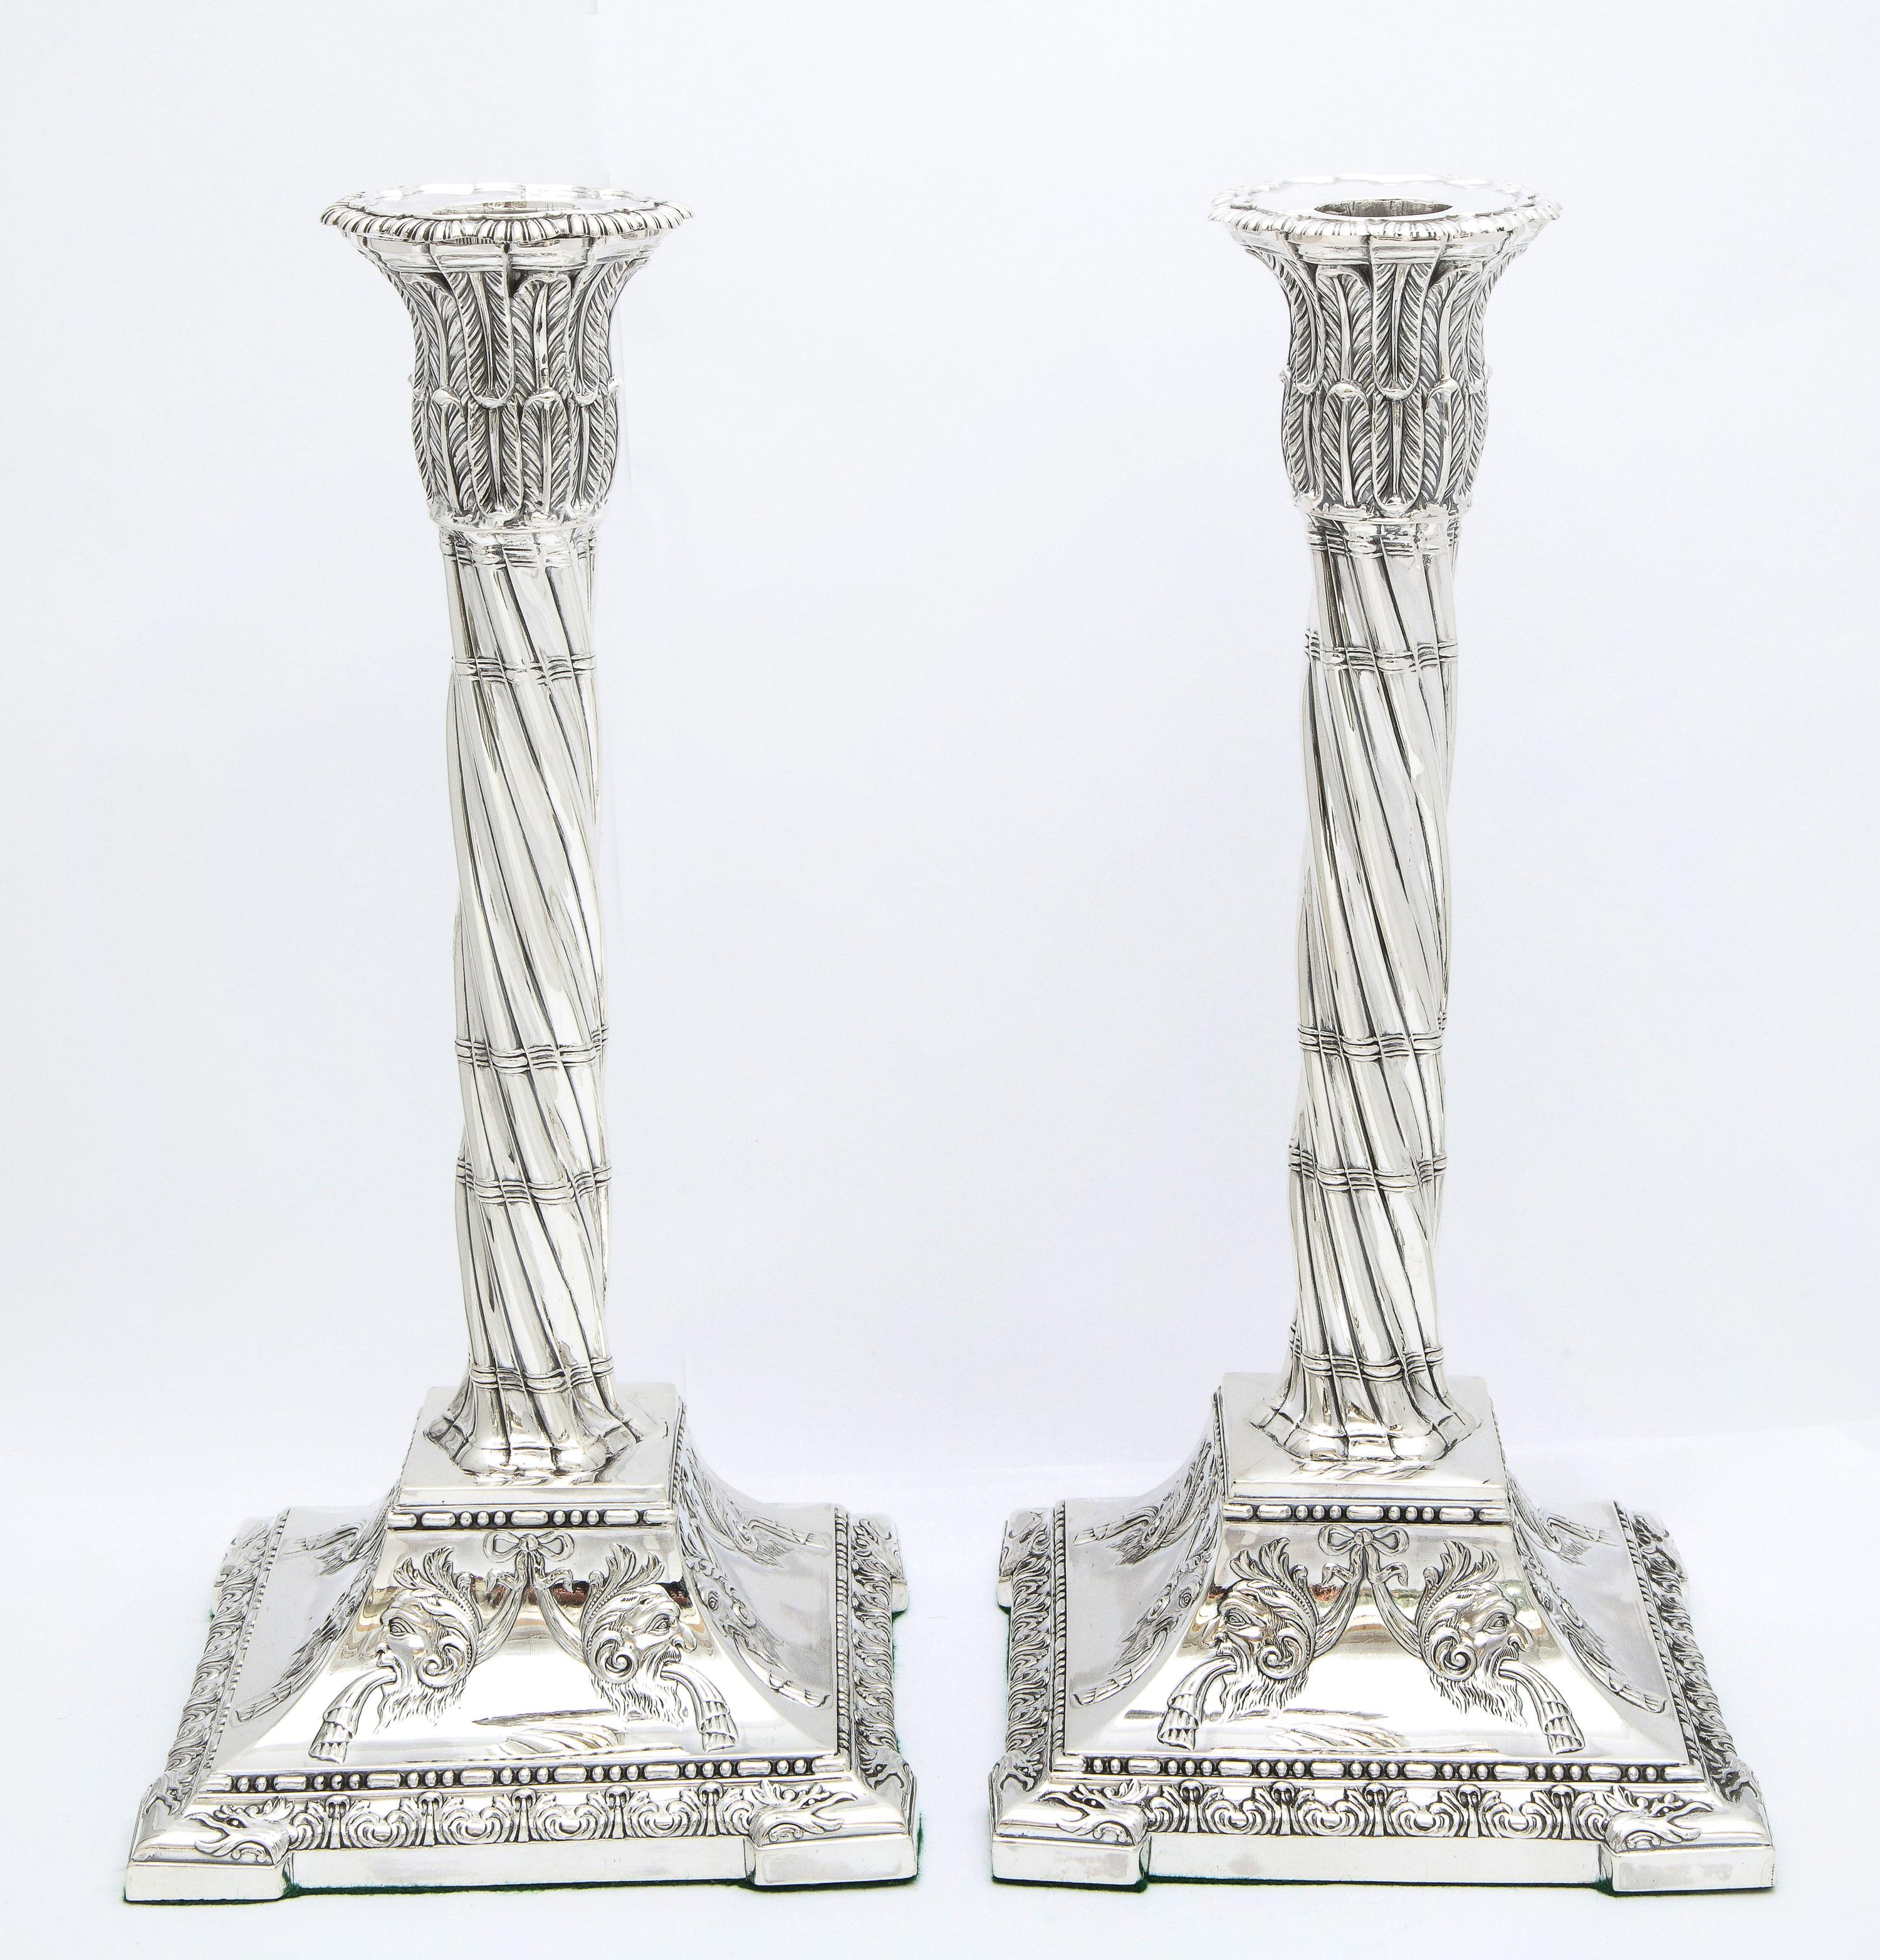 Large pair of Neoclassical (made in the Victorian Period), sterling silver column-form candlesticks, Sheffield, England, year-hallmarked for 1898, Henry Wigful - maker. Each candlestick measures 11 1/6 inches high x 5 1/4 inches deep x 5 1/4 inches